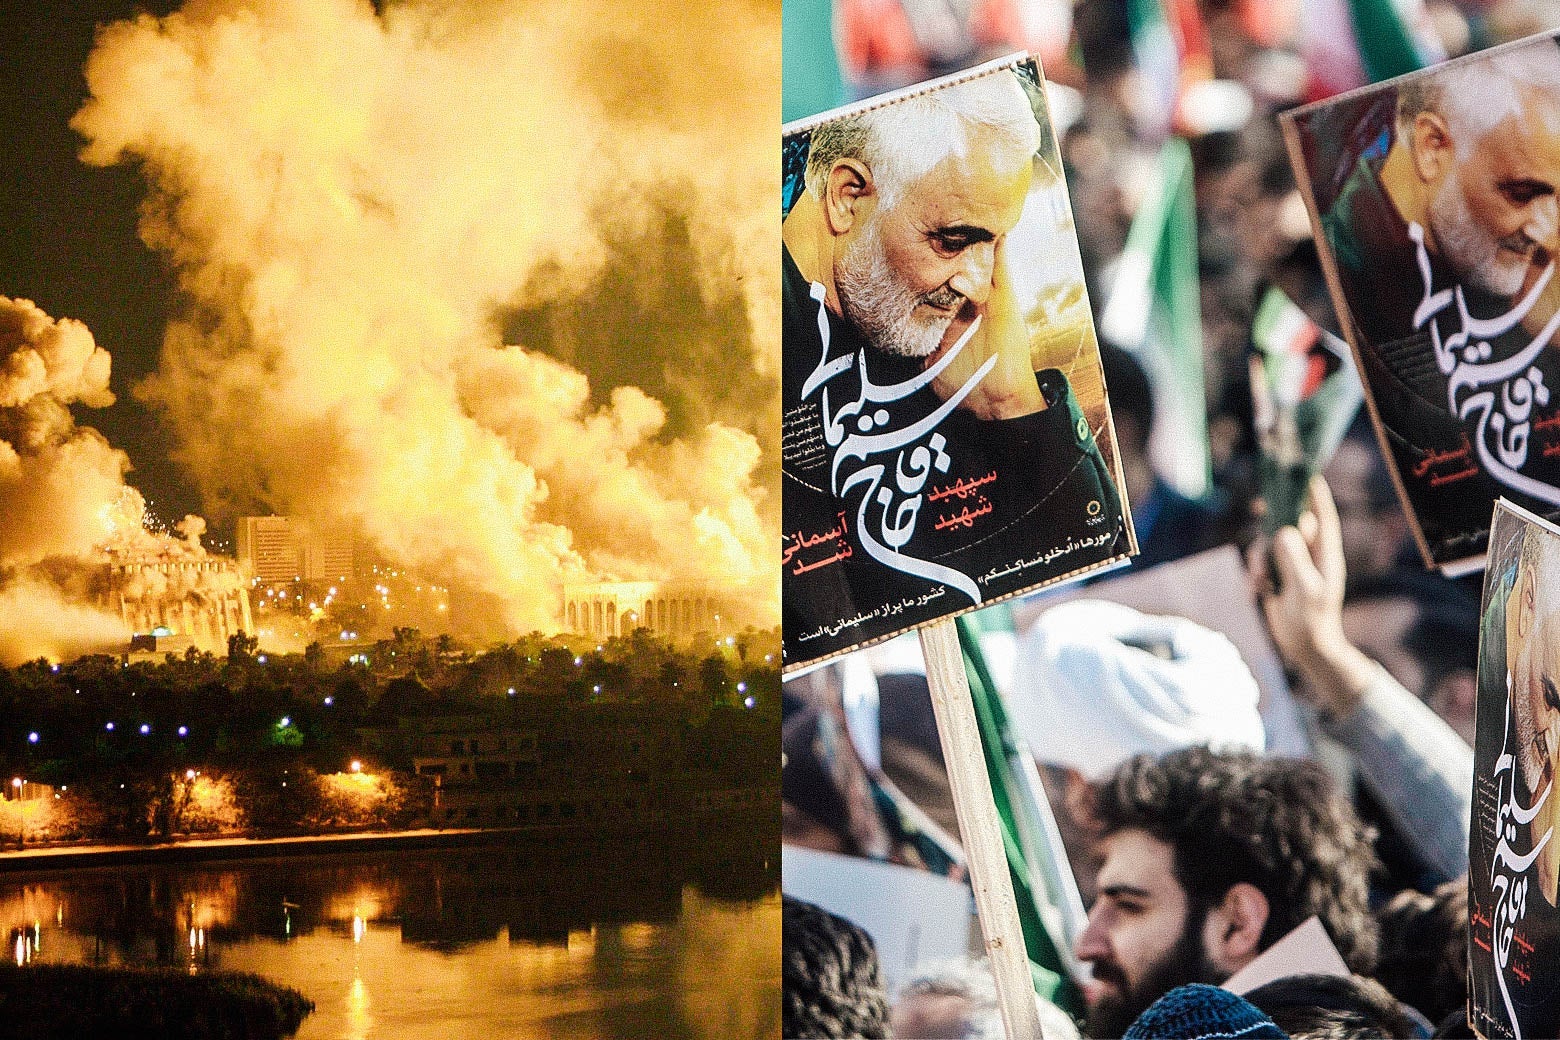 Left: Smoke covers the presidential palace in Baghdad in 2003. Right: People hold posters featuring Gen. Qassem Soleimani's face and Arabic script during the funeral ceremony for him.